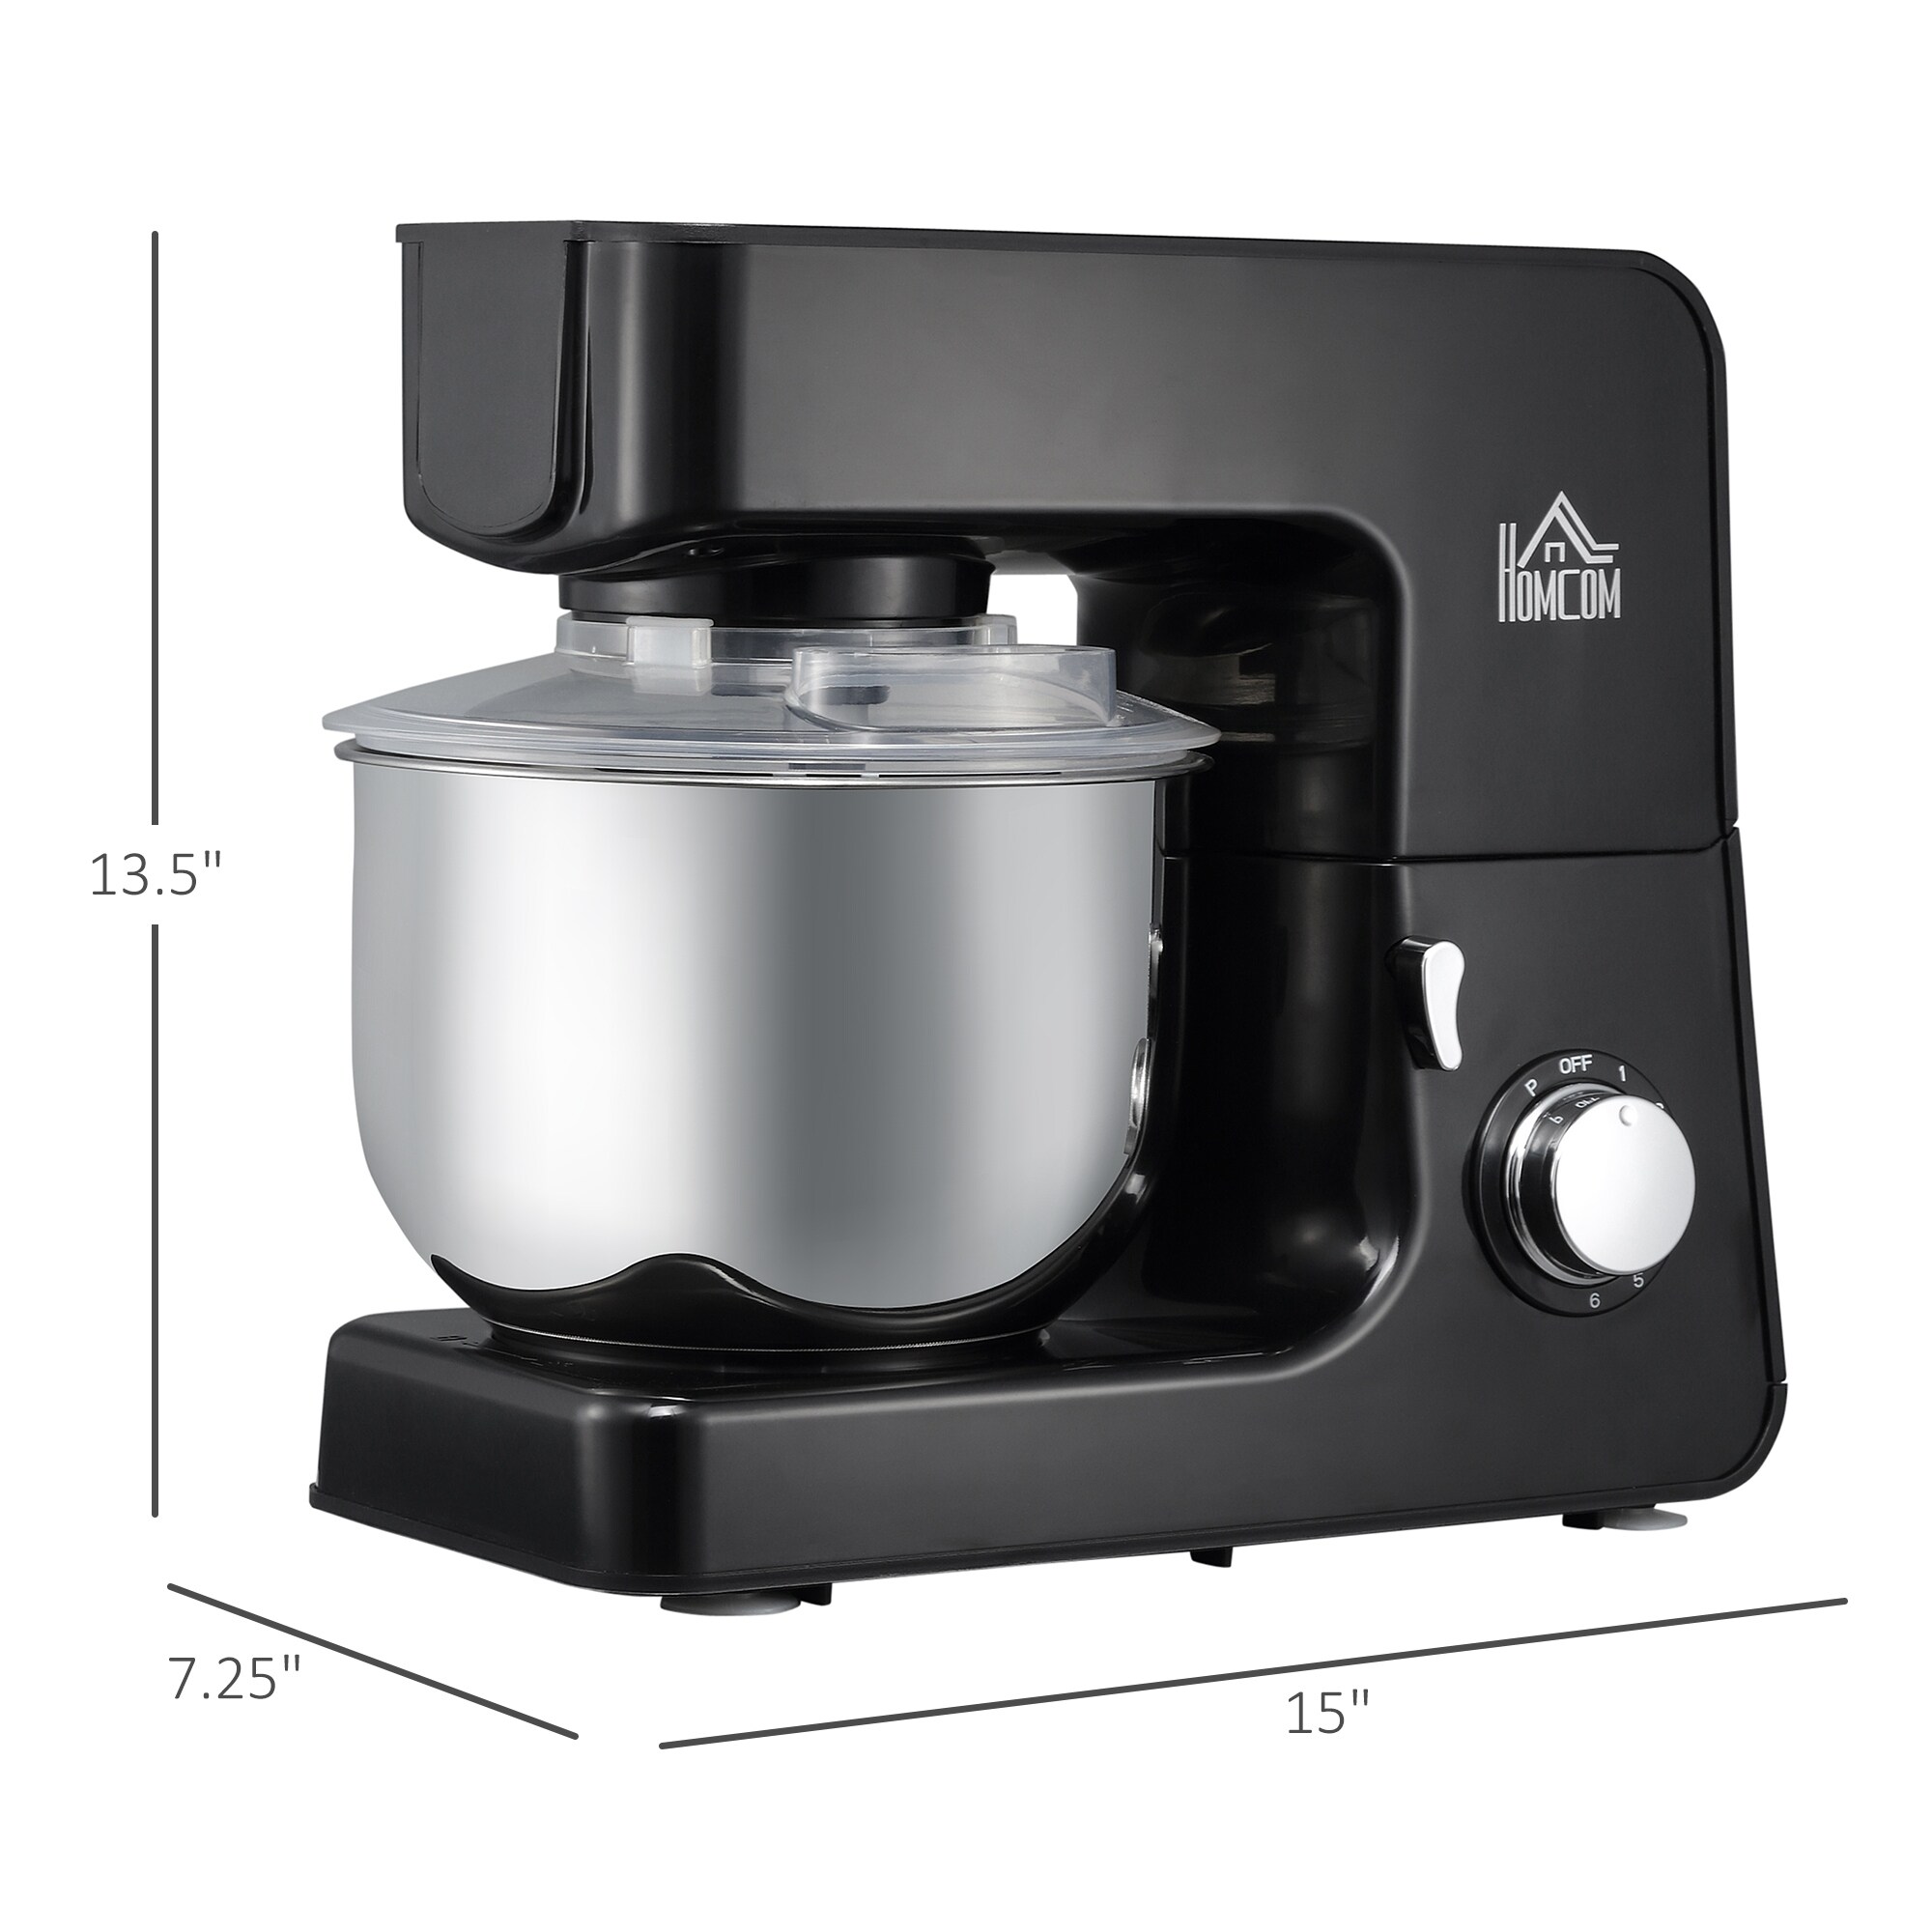 https://ak1.ostkcdn.com/images/products/is/images/direct/695947521501e2f6e36ecaa1d98519ec1b541b7f/HOMCOM-6-Qt-Stand-Mixer-with-6%2B1P-Speed%2C-600W-Tilt-Head-Kitchen-Electric-Mixer-with-Stainless-Steel-Beater%2C-Dough-Hook-and-Whisk.jpg